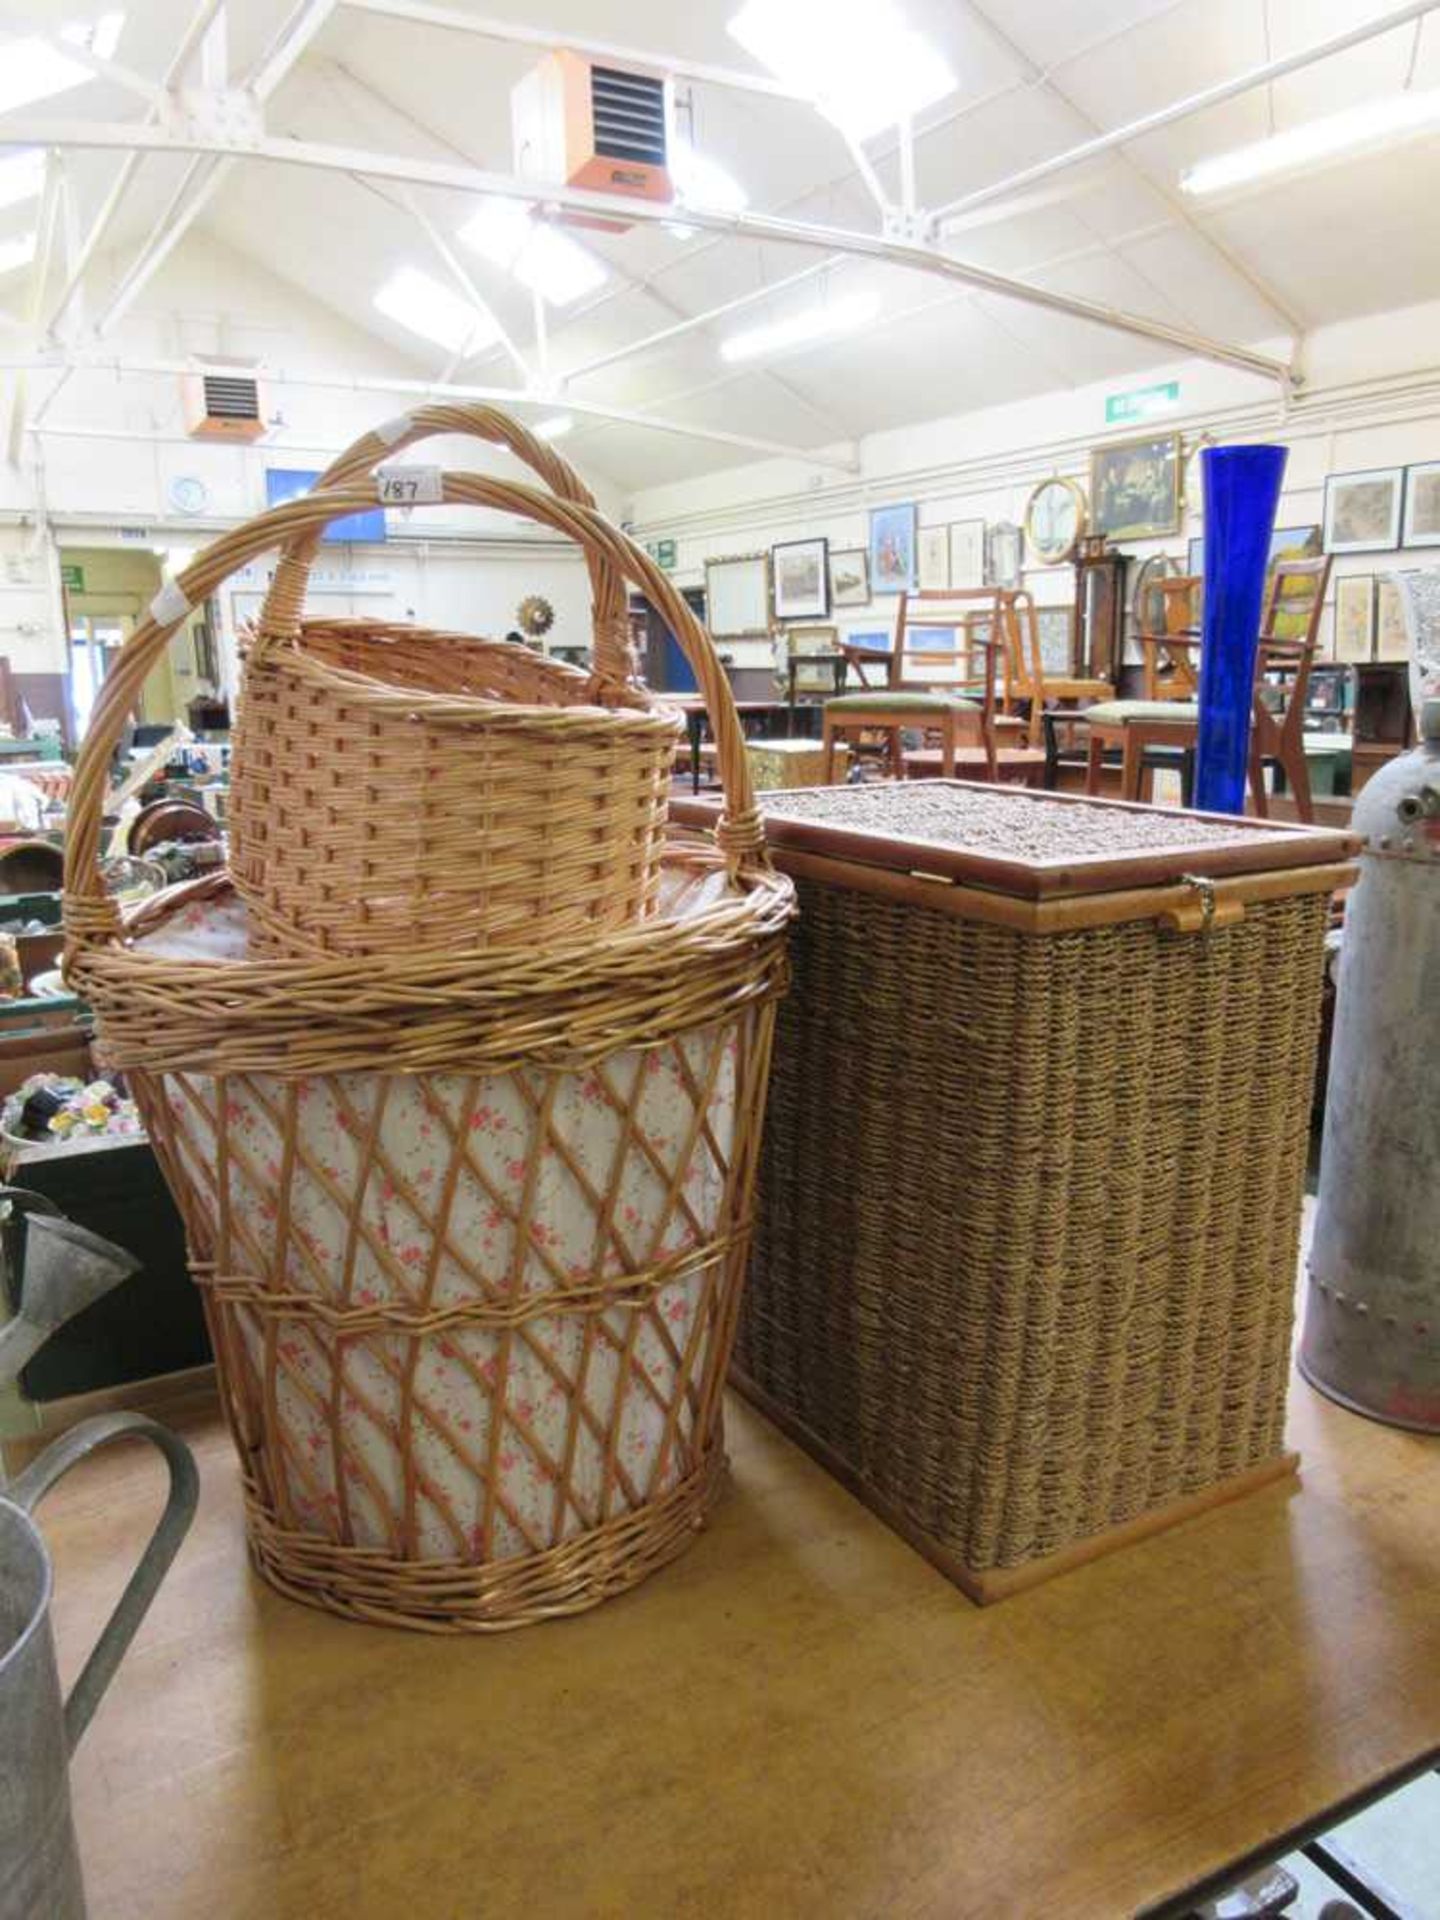 Two wicker baskets together with a seagrass linen basket